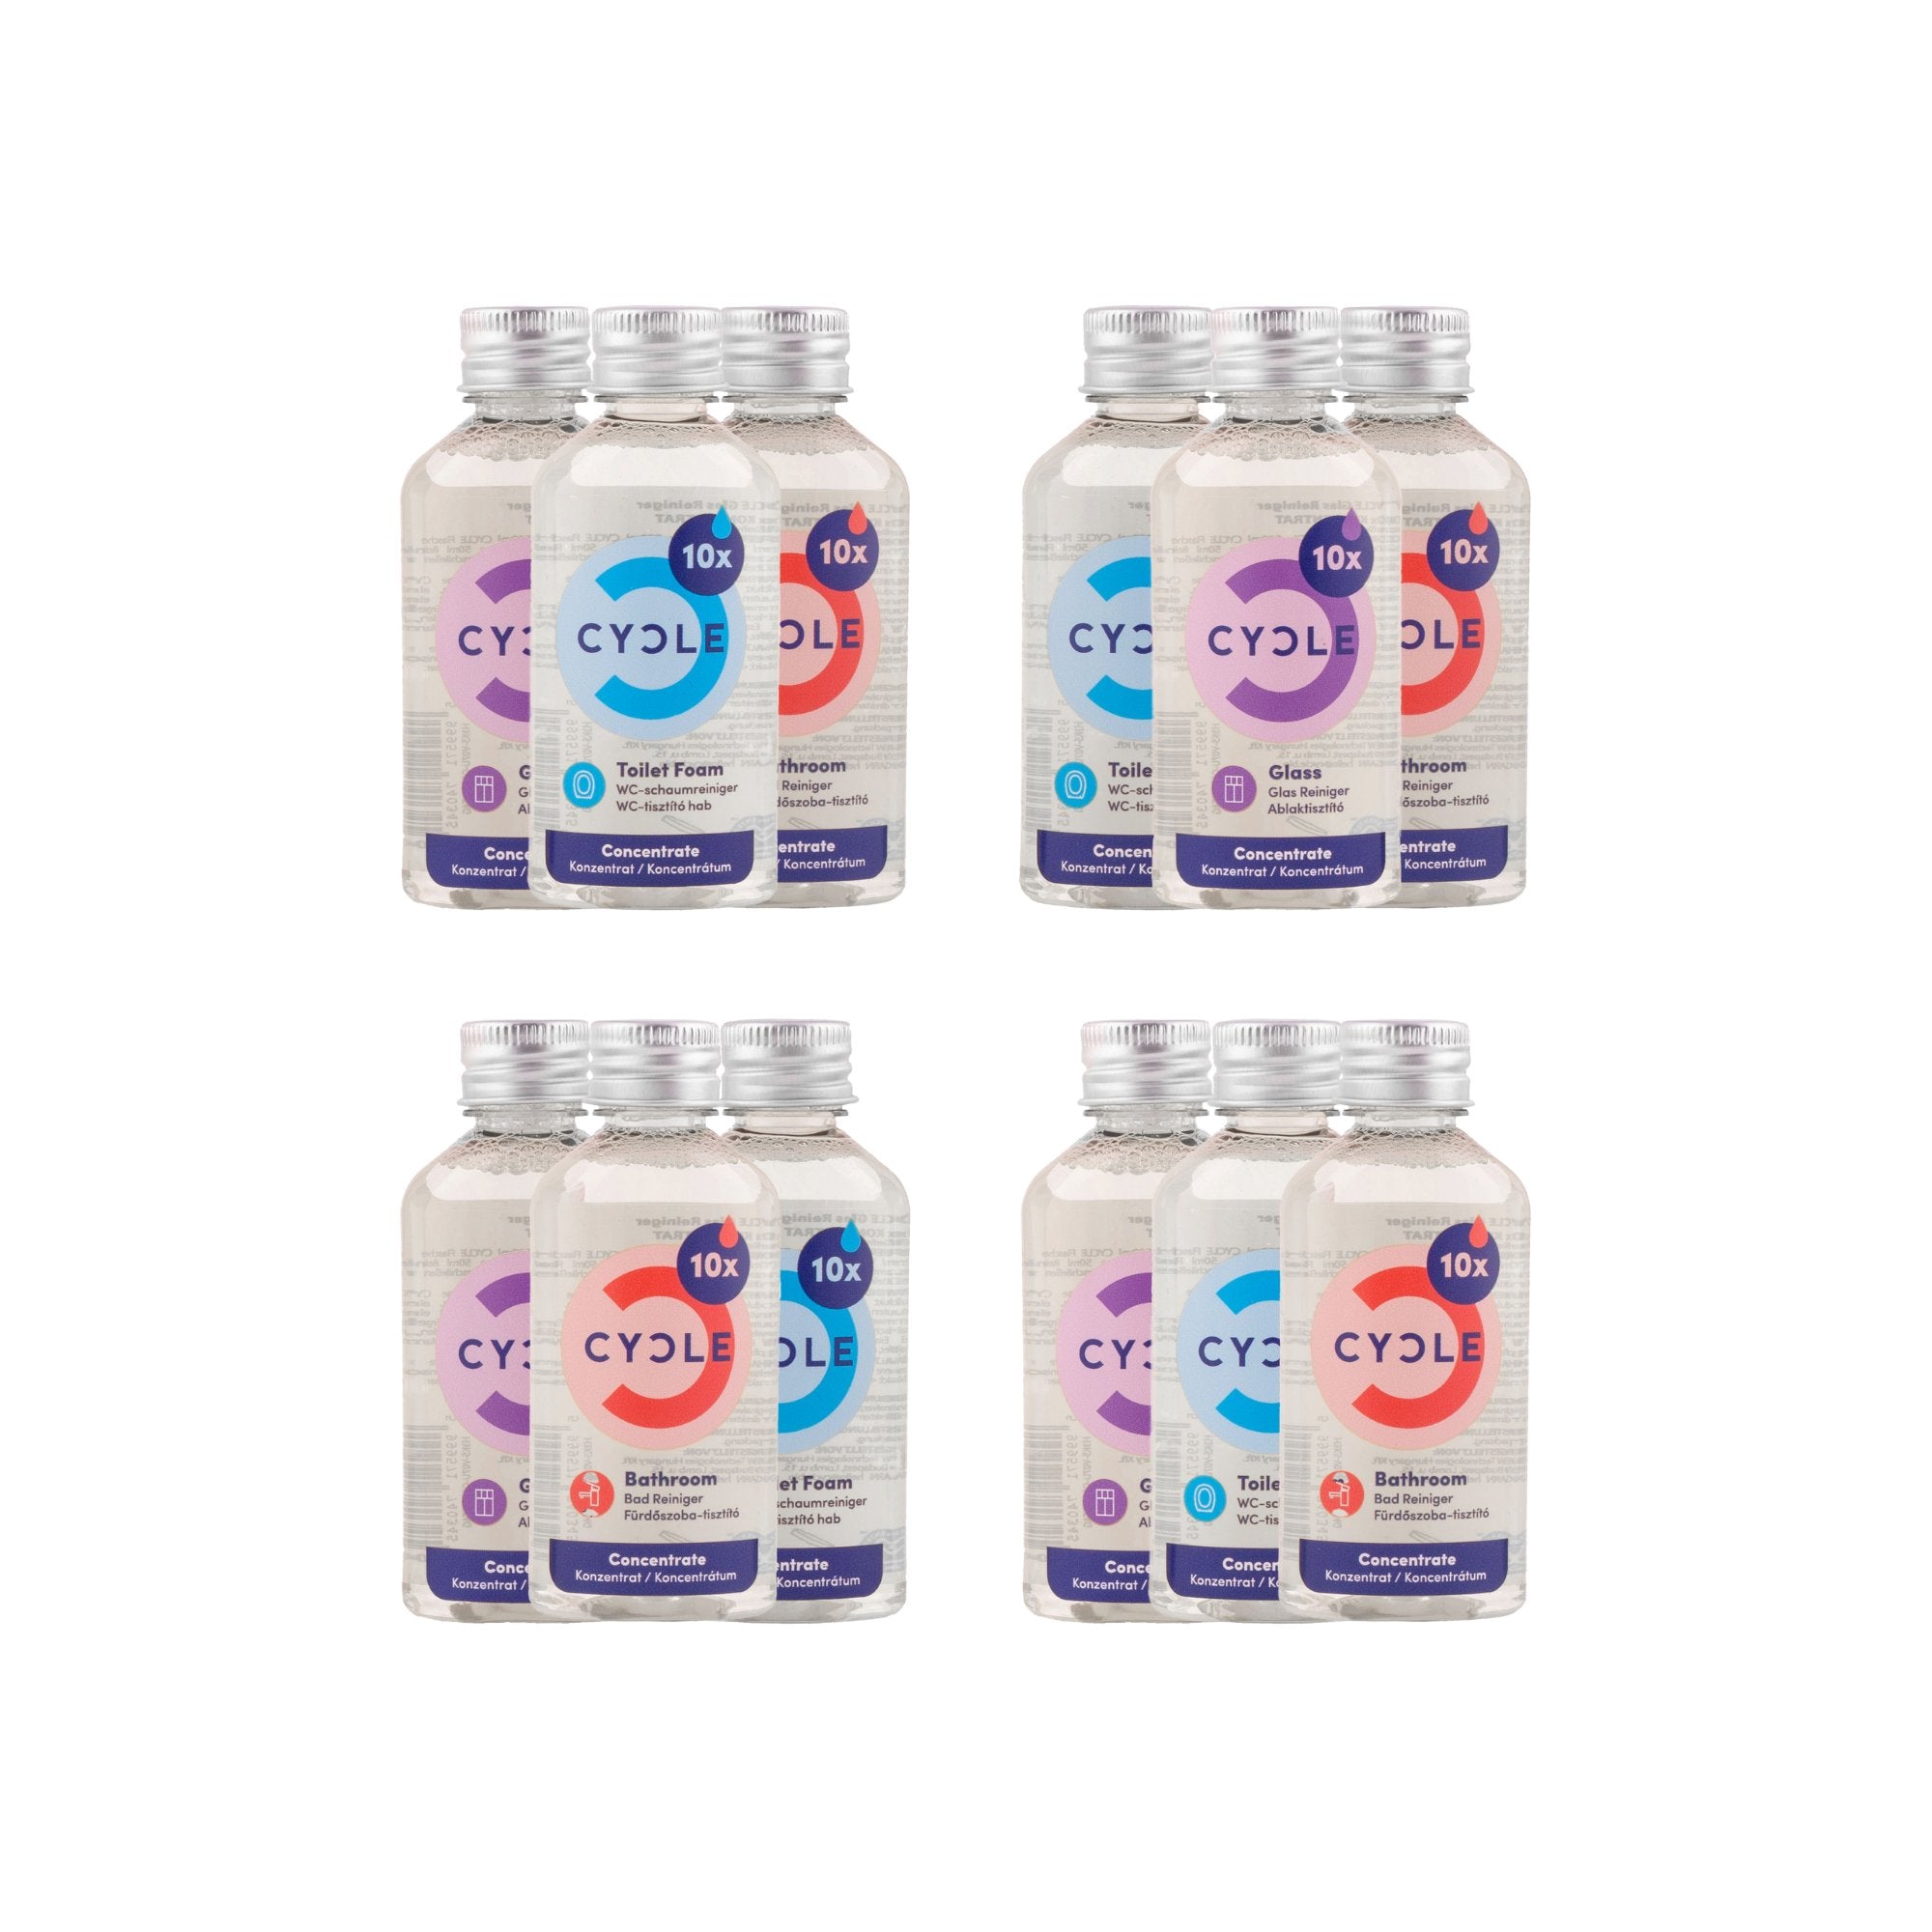 4x Bath Refill Pack - CYCLE eco-friendly cleaners